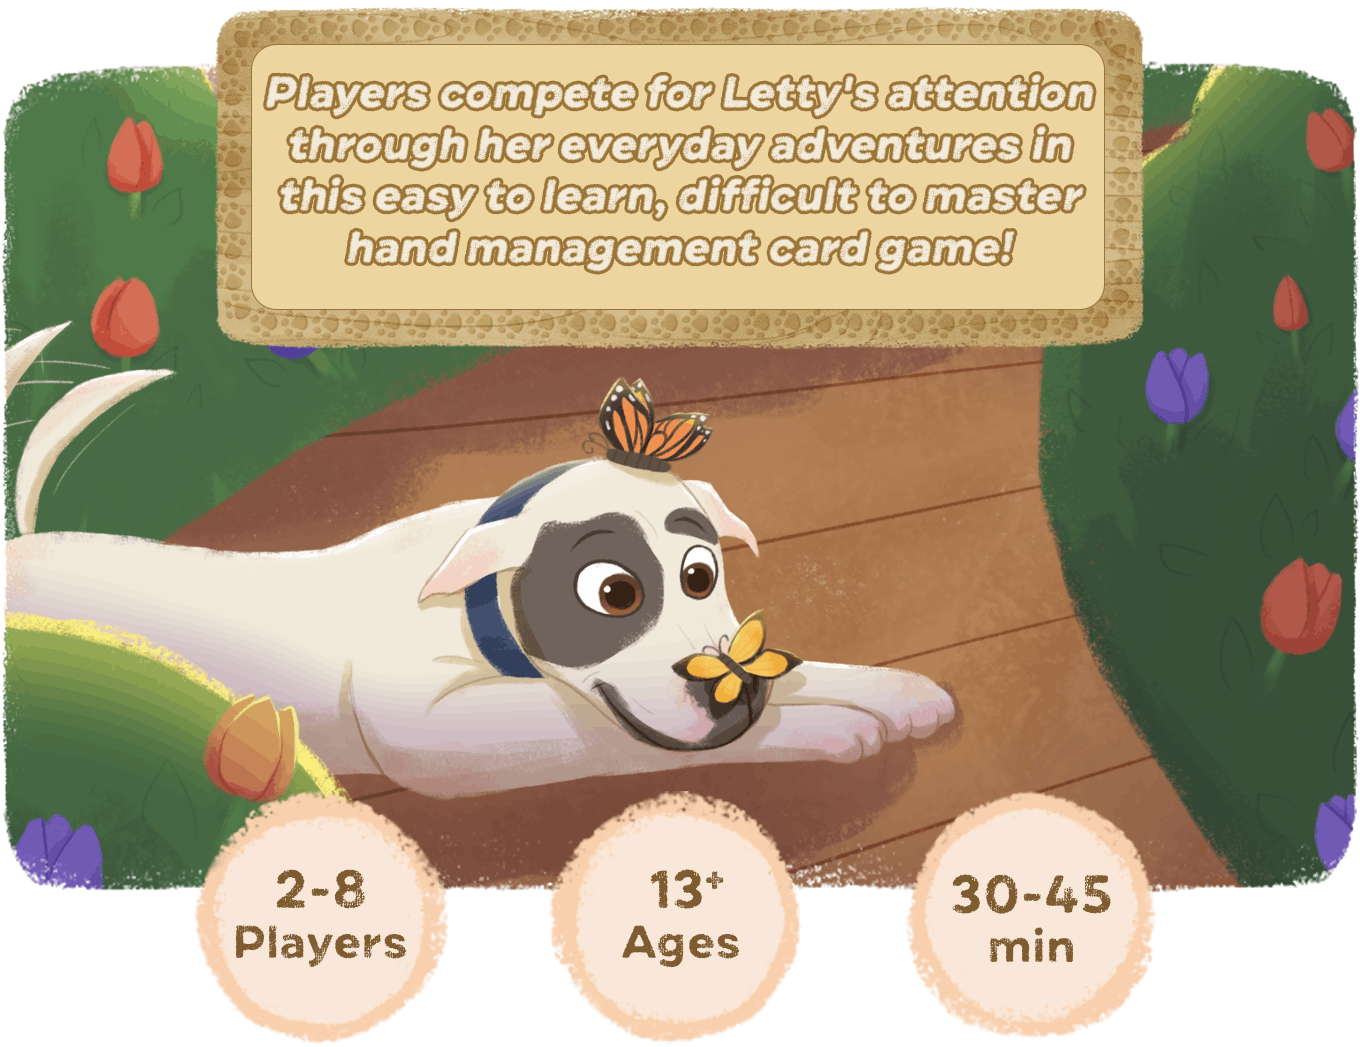 In this adorable hand management game, players compete for Letty's attention by playing cards that give her things like cuddles, treats, and walks in the park. Whoever has Letty's attention when any player runs out of cards, wins.